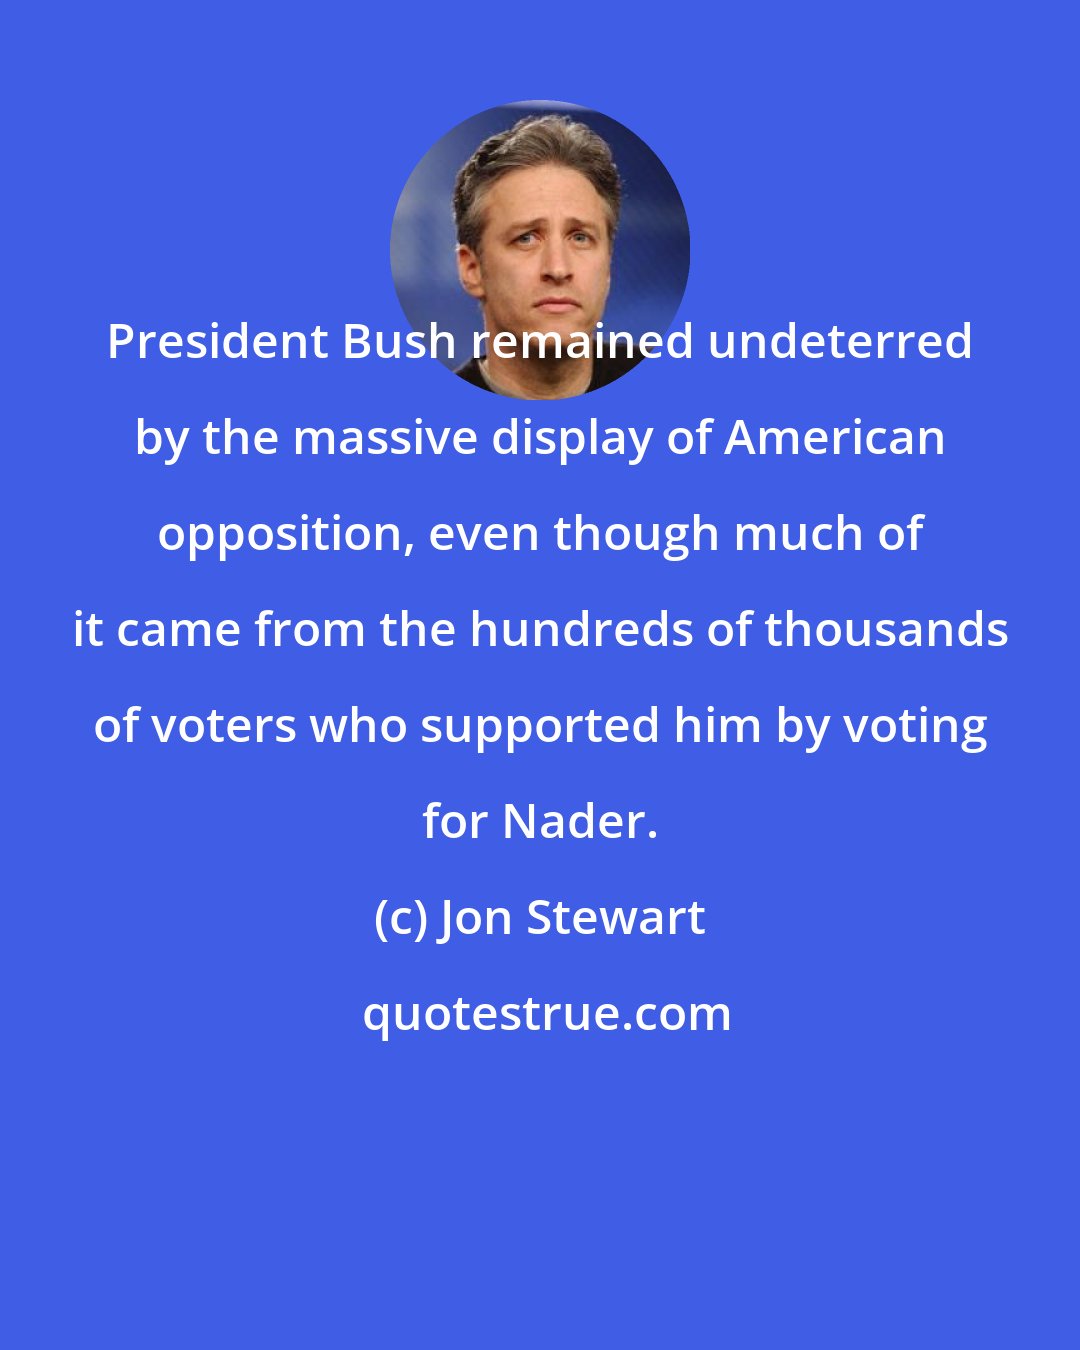 Jon Stewart: President Bush remained undeterred by the massive display of American opposition, even though much of it came from the hundreds of thousands of voters who supported him by voting for Nader.